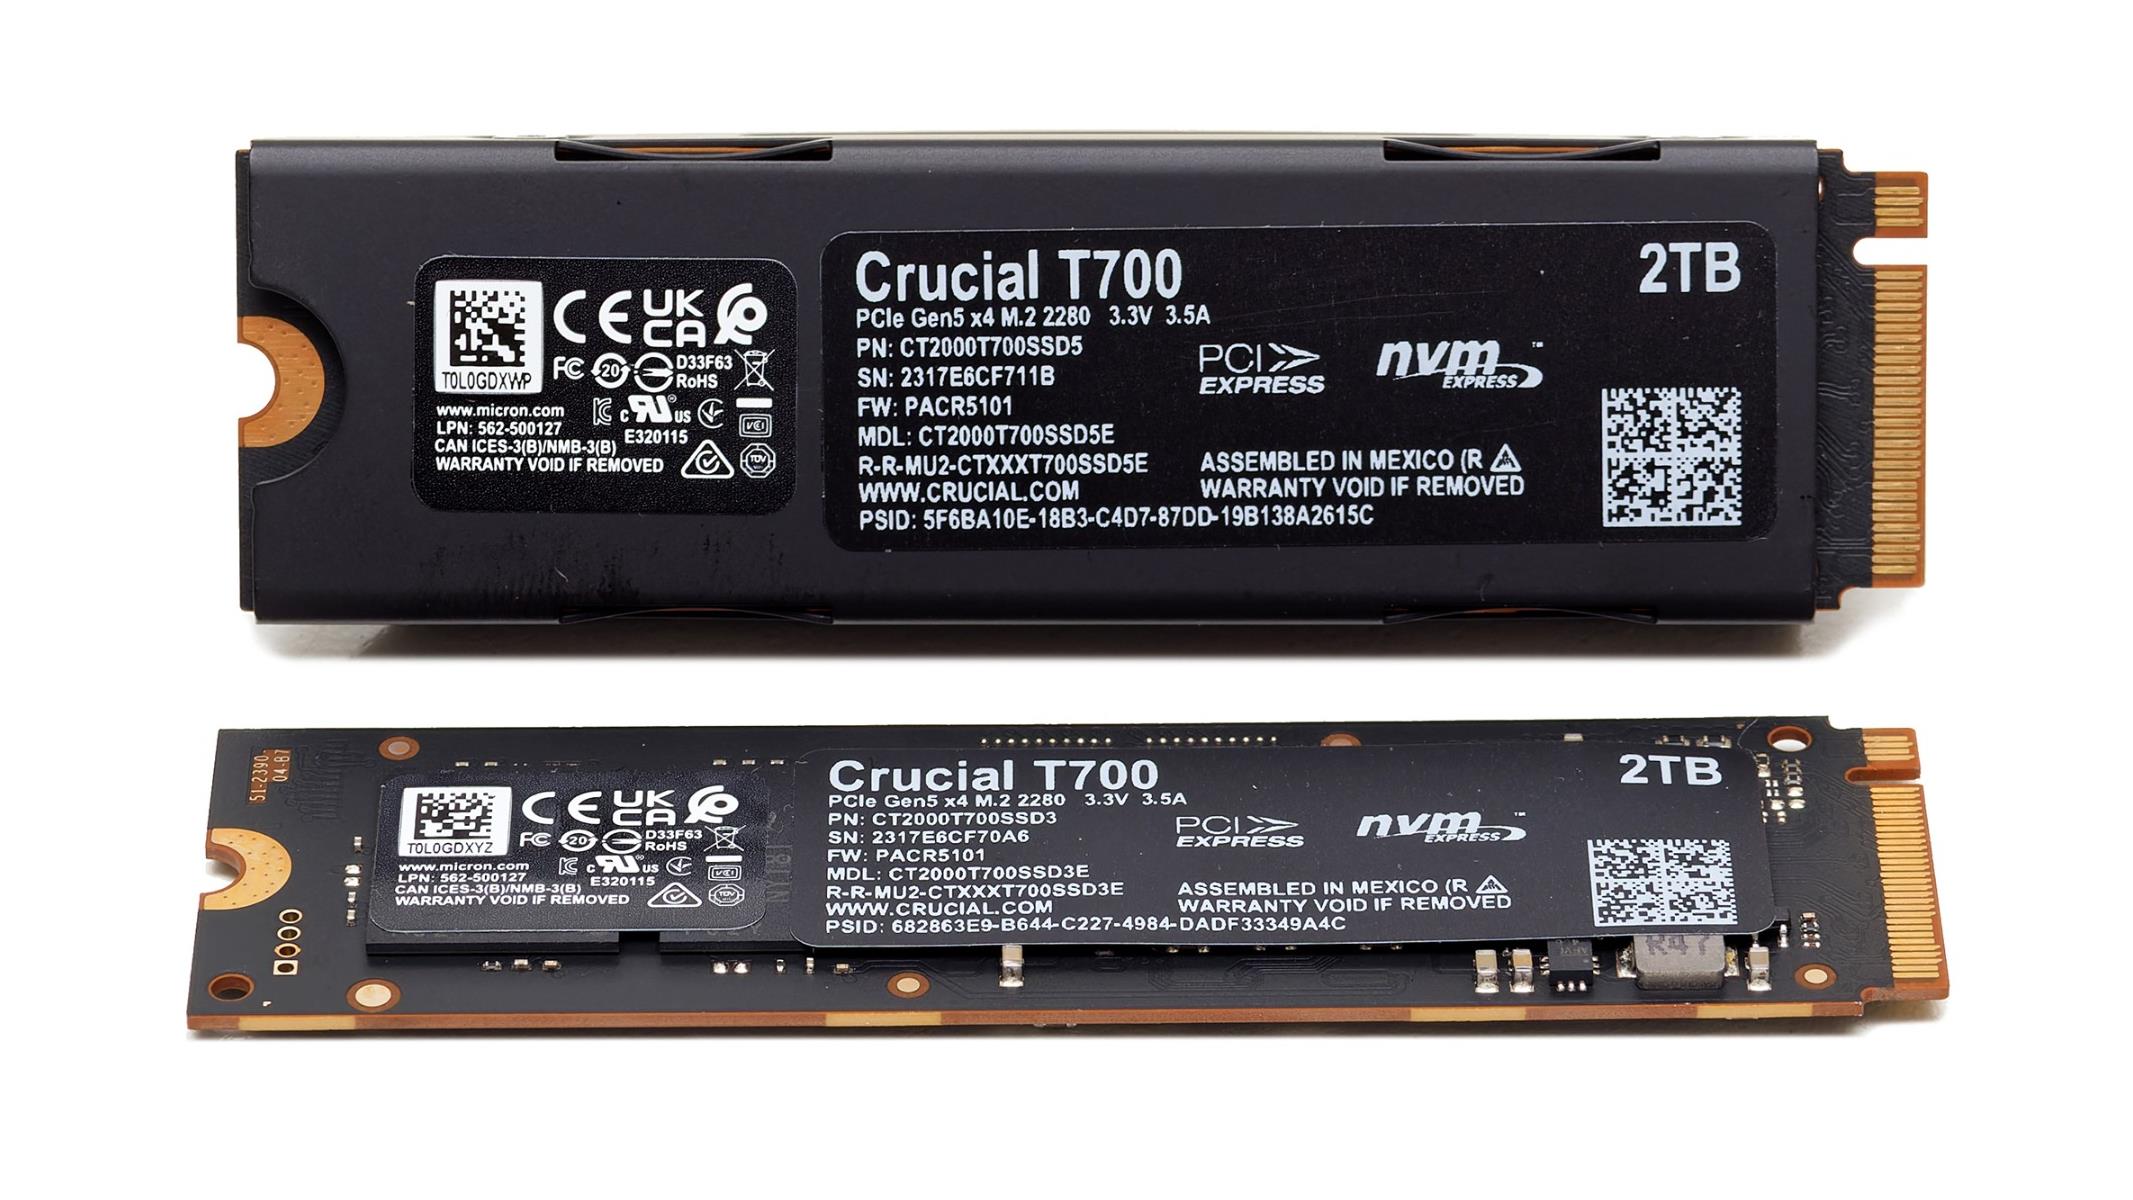 Crucial T700 Review: A Hot PCIe 5.0 SSD